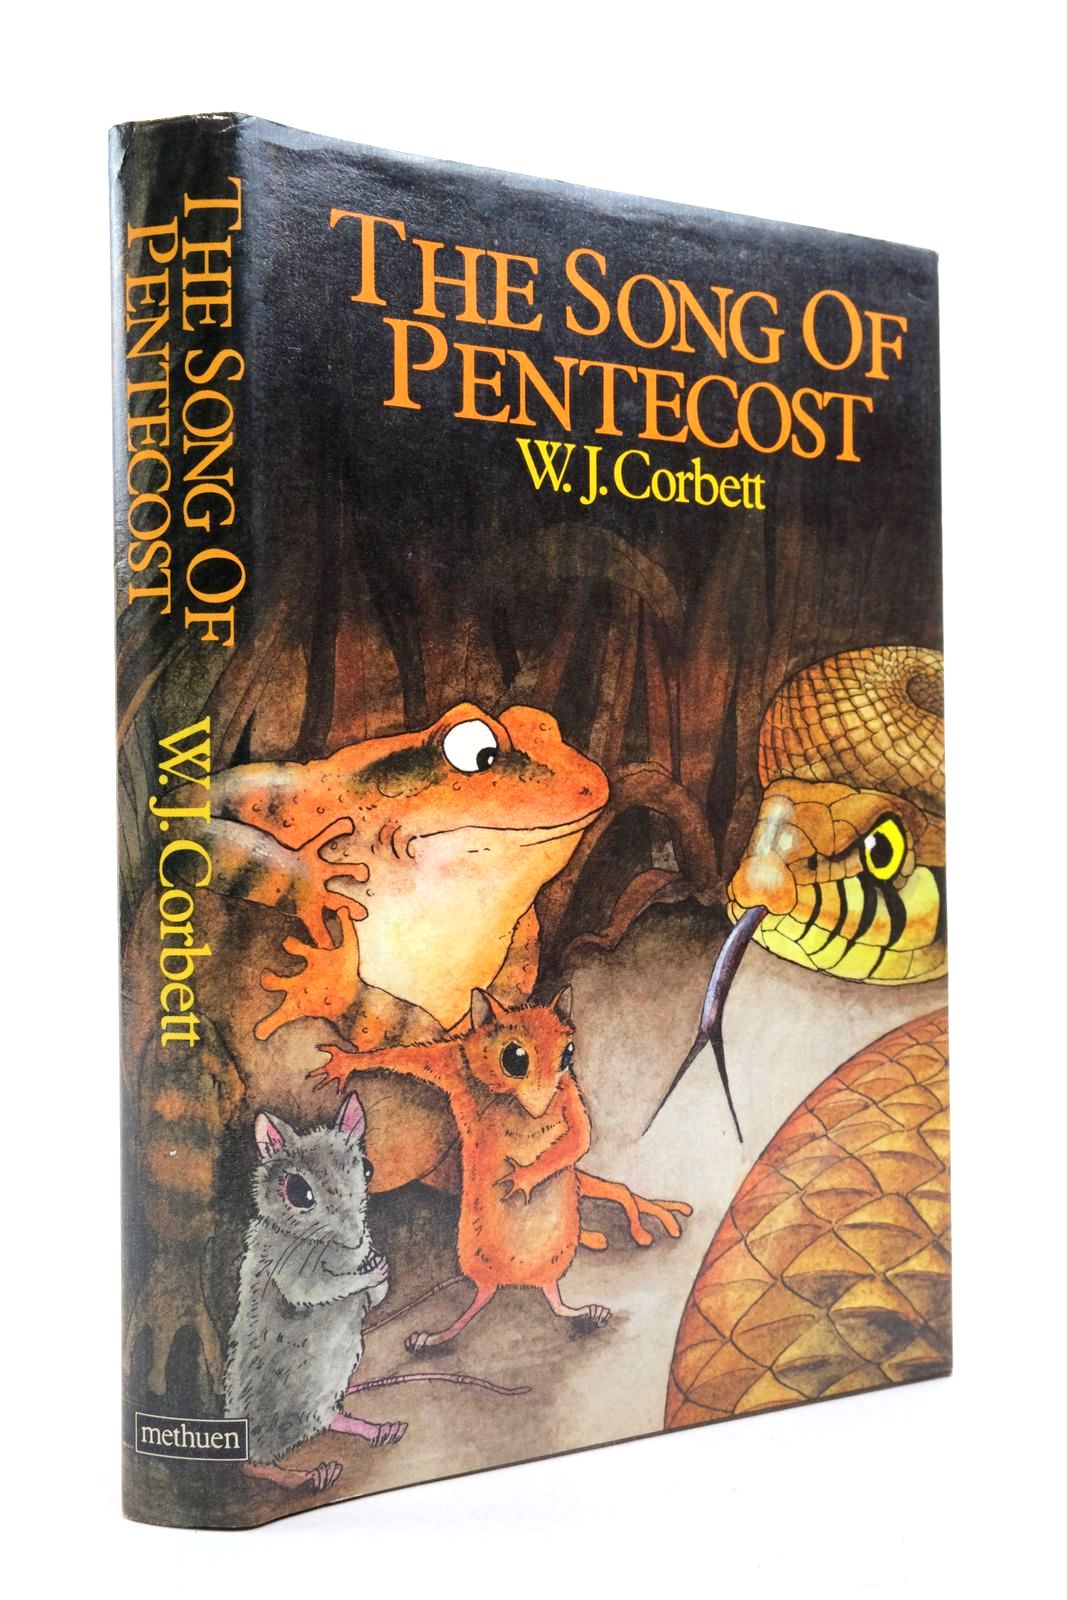 Photo of THE SONG OF PENTECOST written by Corbett, W.J. illustrated by Ursell, Martin published by Methuen (STOCK CODE: 2138161)  for sale by Stella & Rose's Books